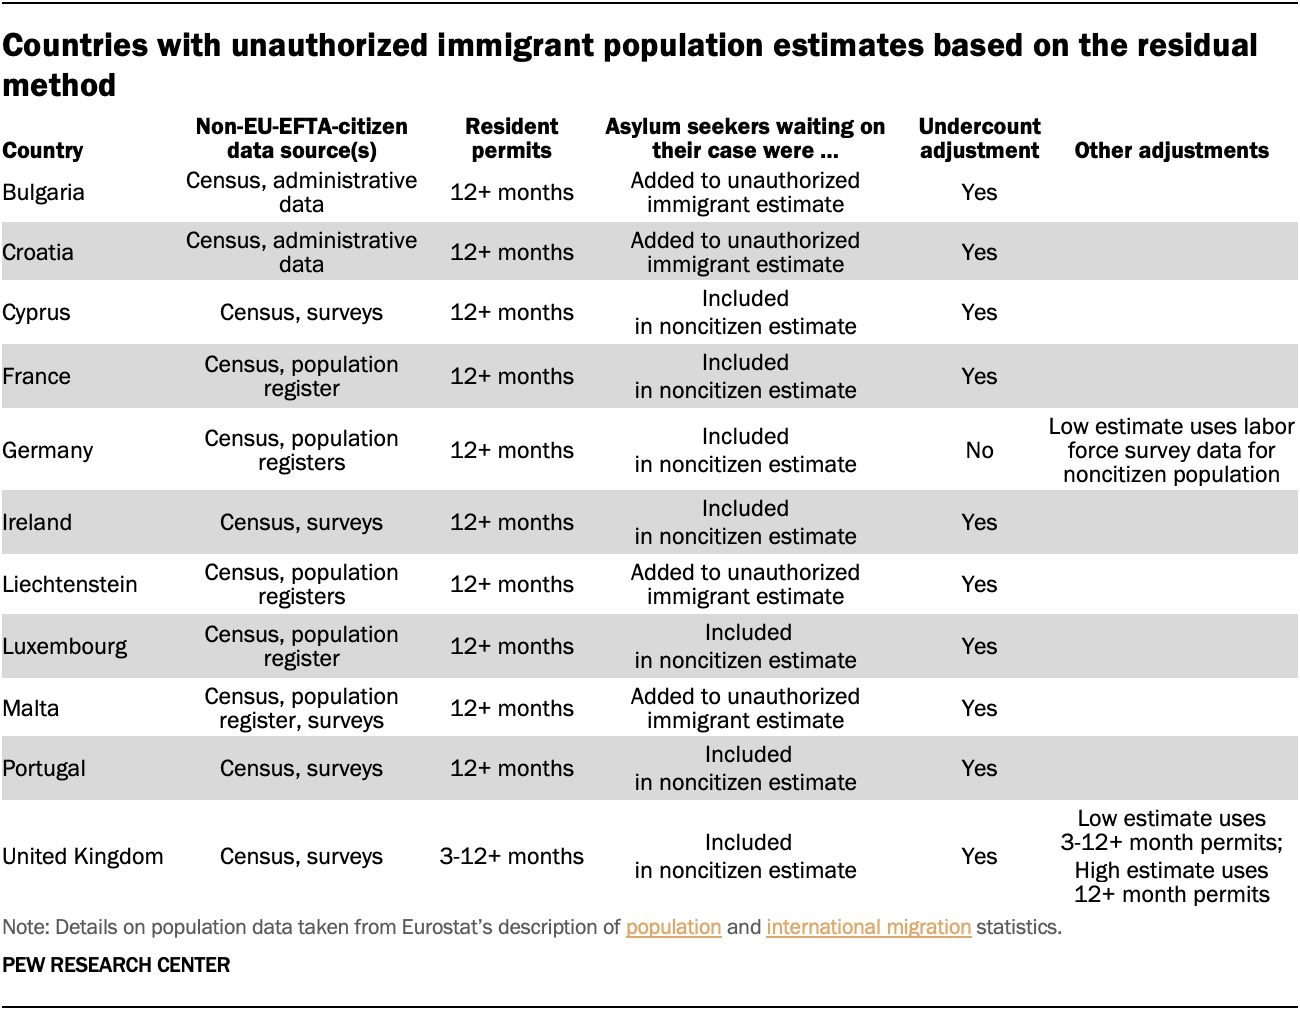 Countries with unauthorized immigrant population estimates based on the residual method